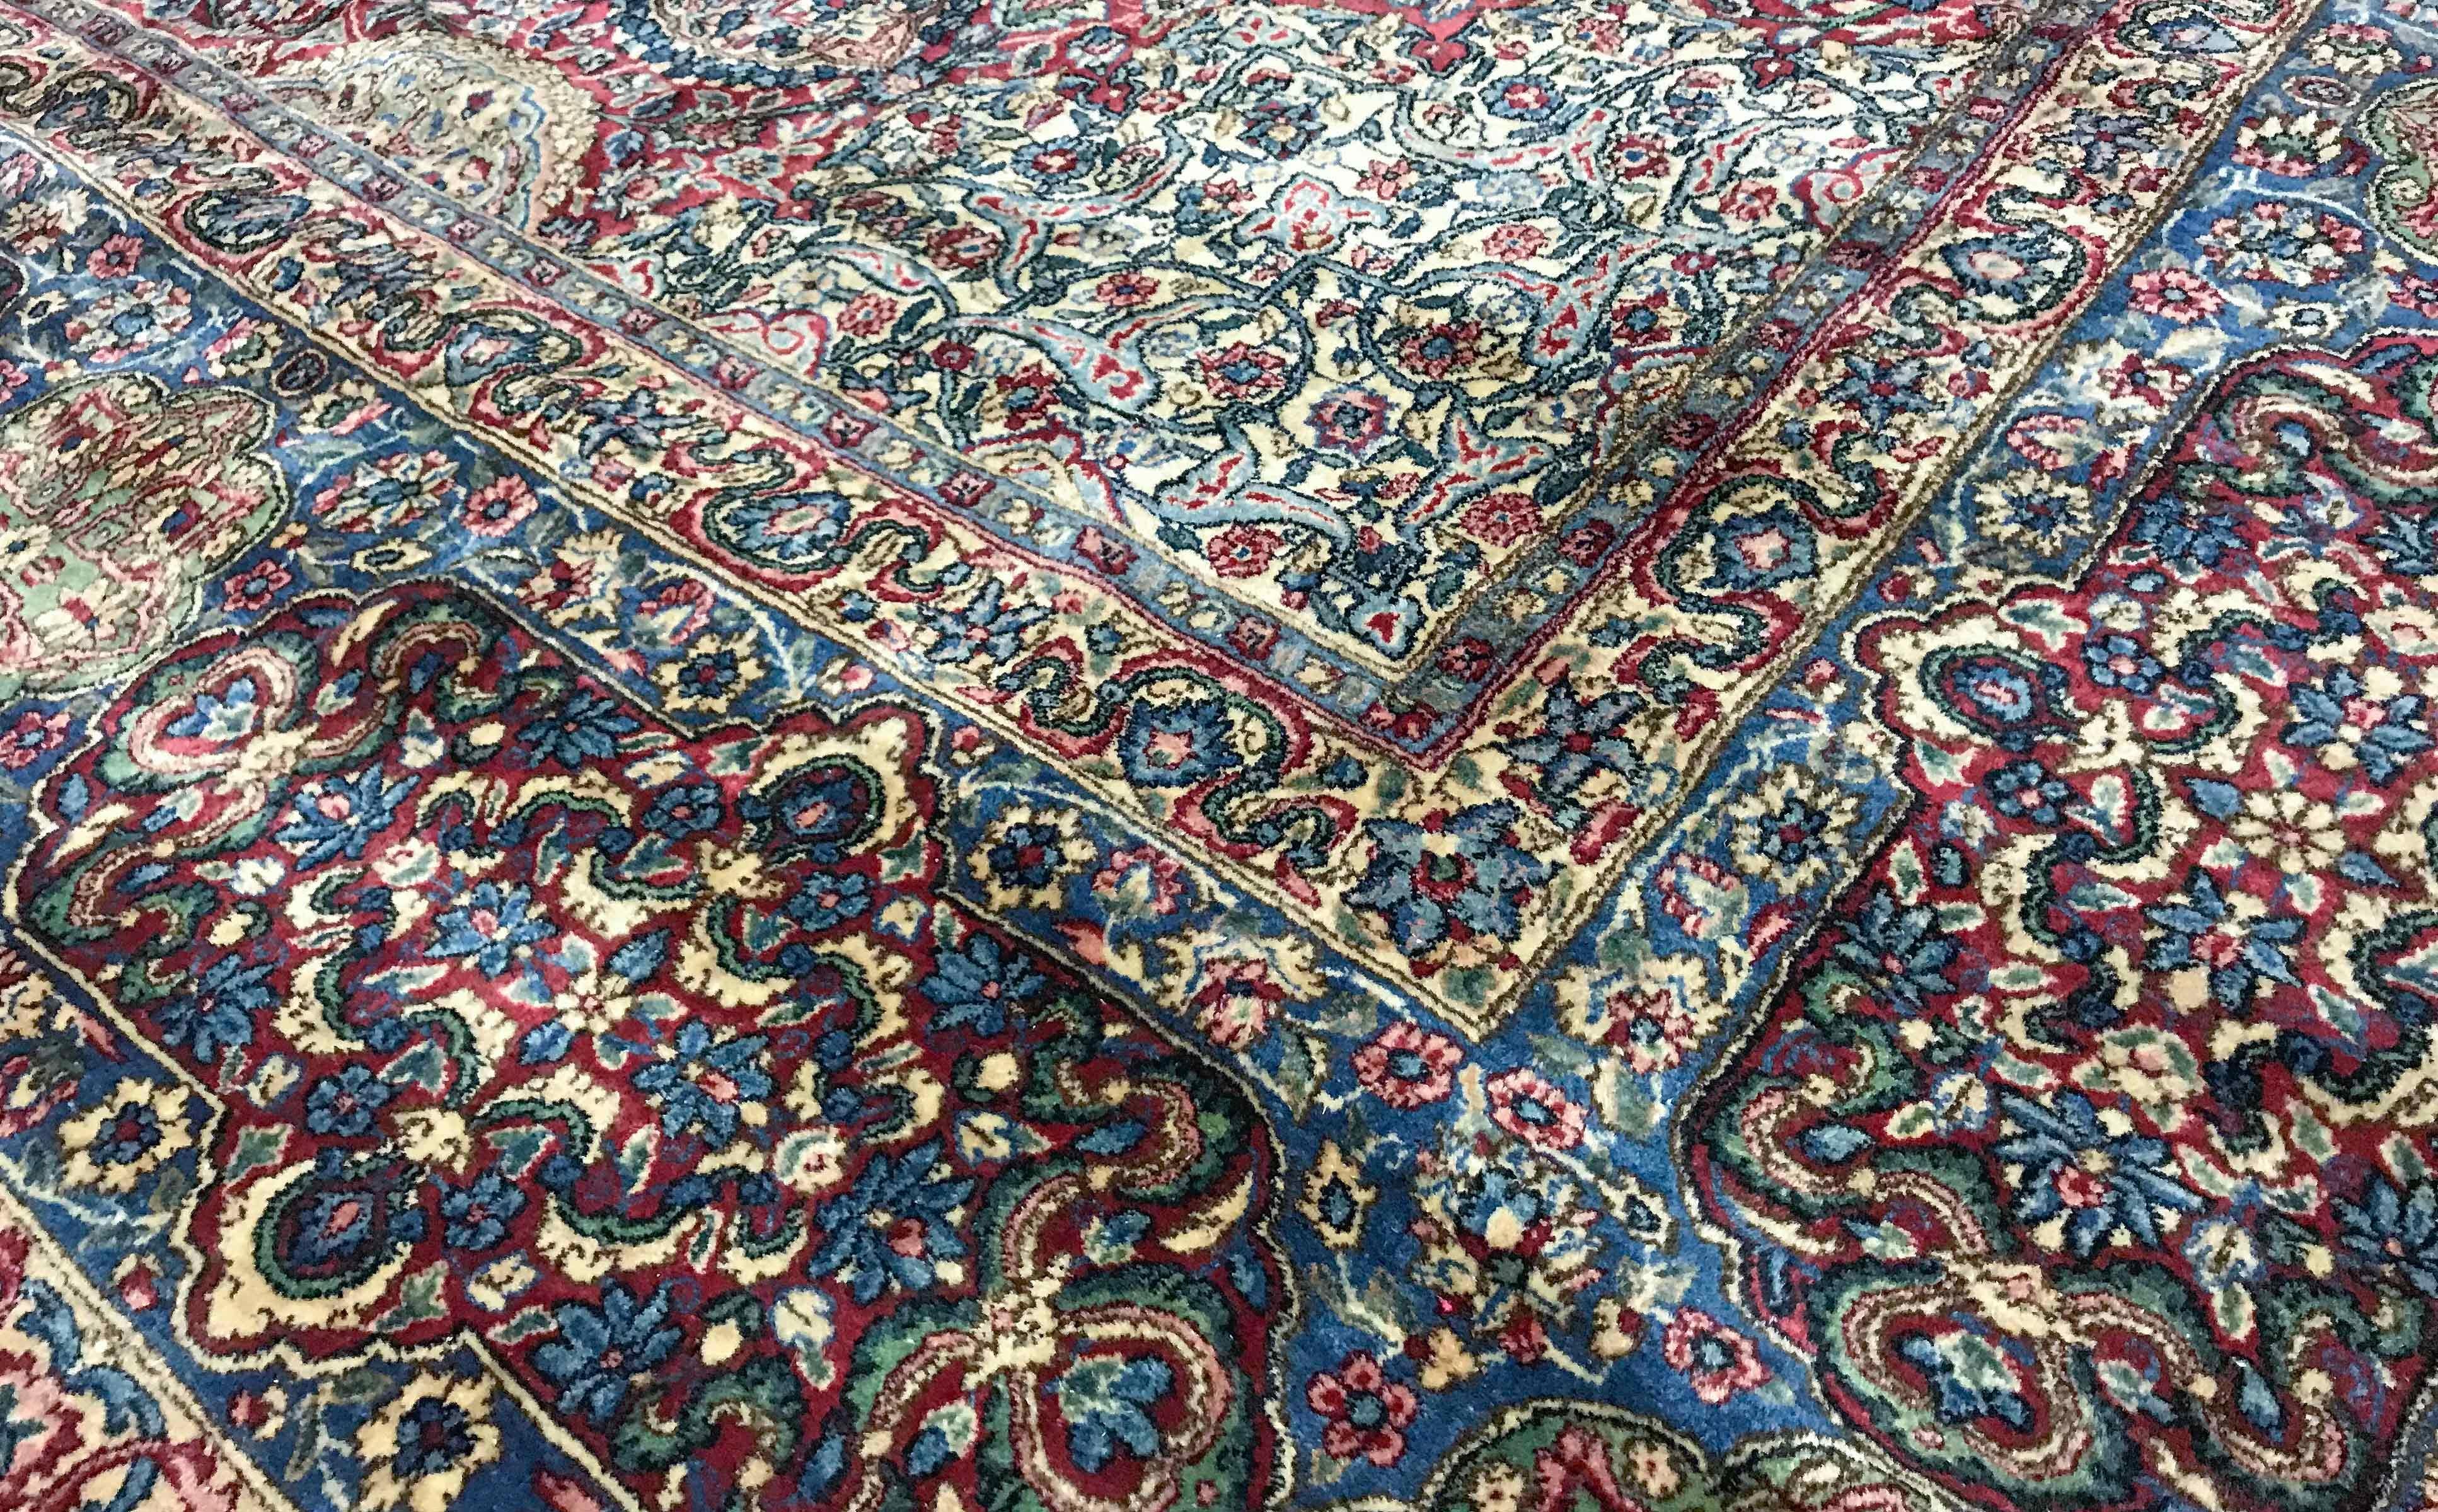 Vintage Persian Kerman rug, circa 1940. The wonderful design and detail in this rug truly highlights the skill of the weavers in creating this work of art. The field is overflowing with floral elements in a wide variety of colors and shades all